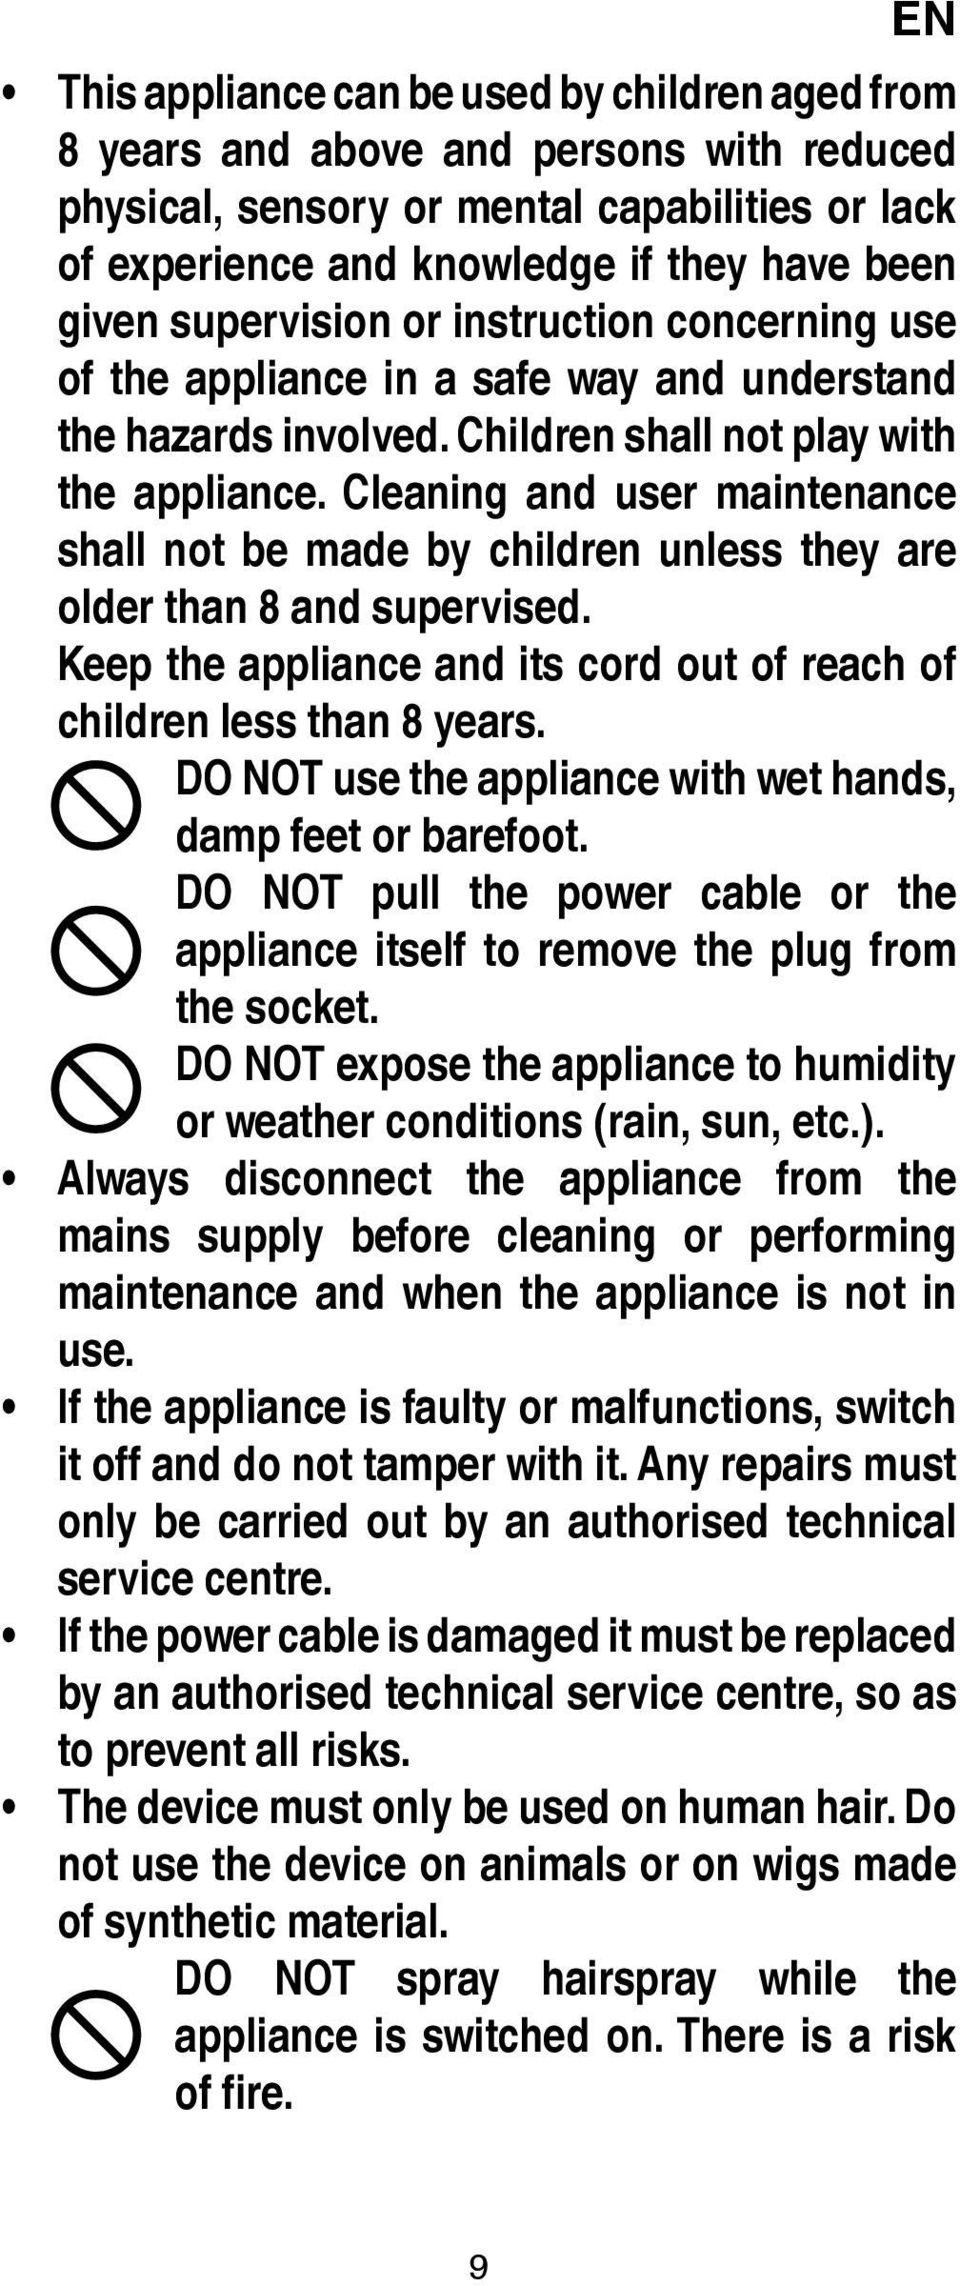 Cleaning and user maintenance shall not be made by children unless they are older than 8 and supervised. Keep the appliance and its cord out of reach of children less than 8 years.